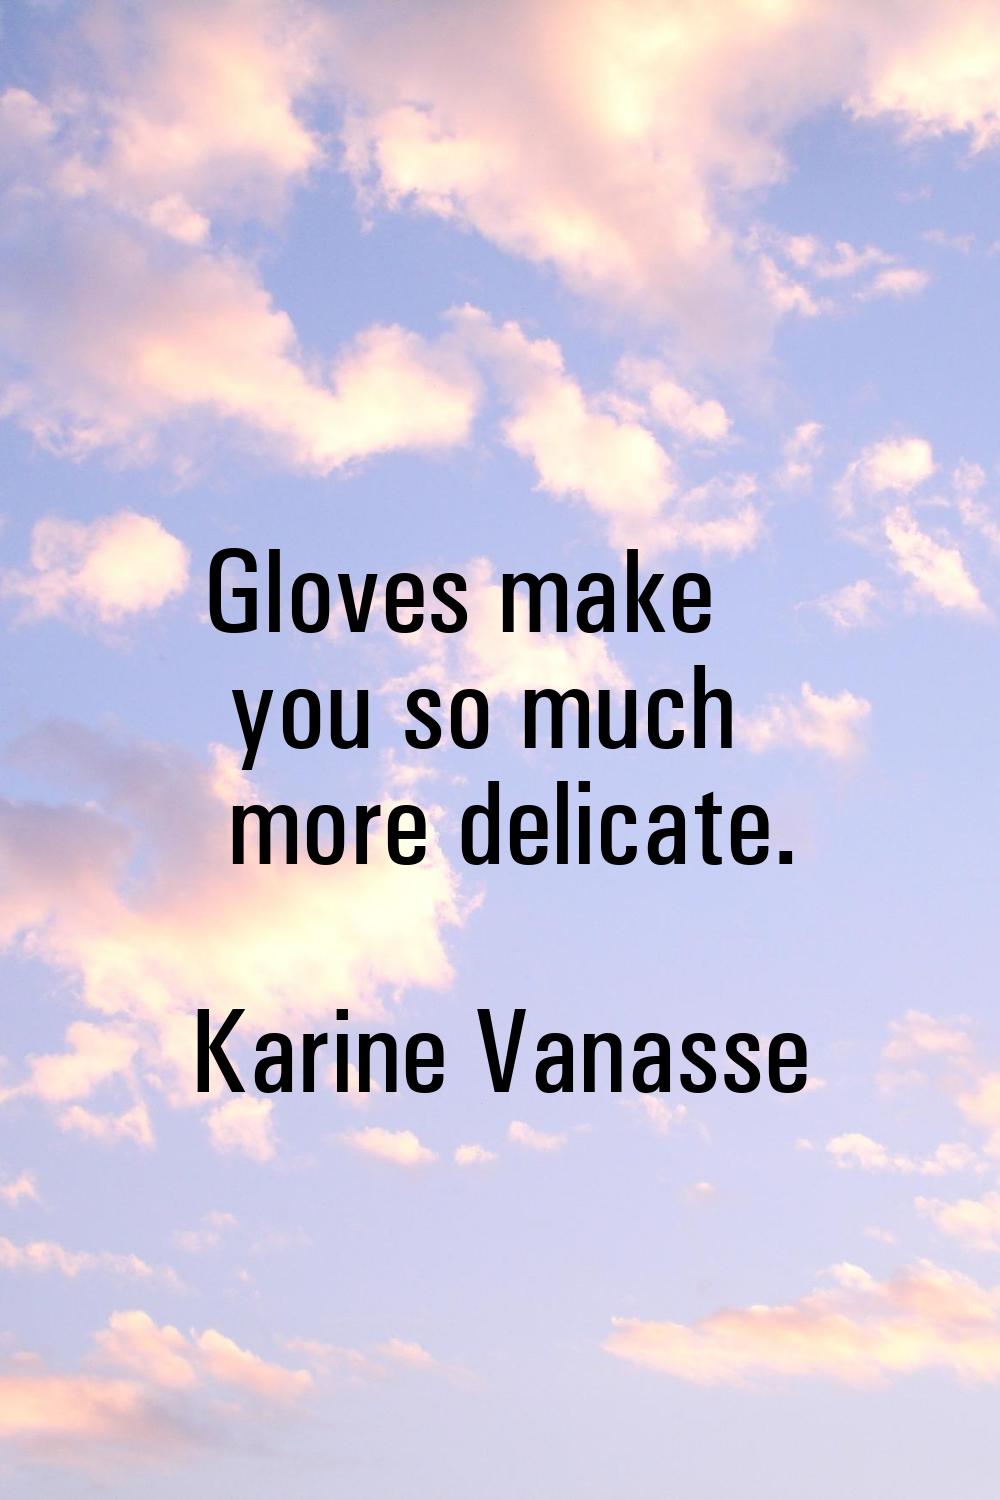 Gloves make you so much more delicate.